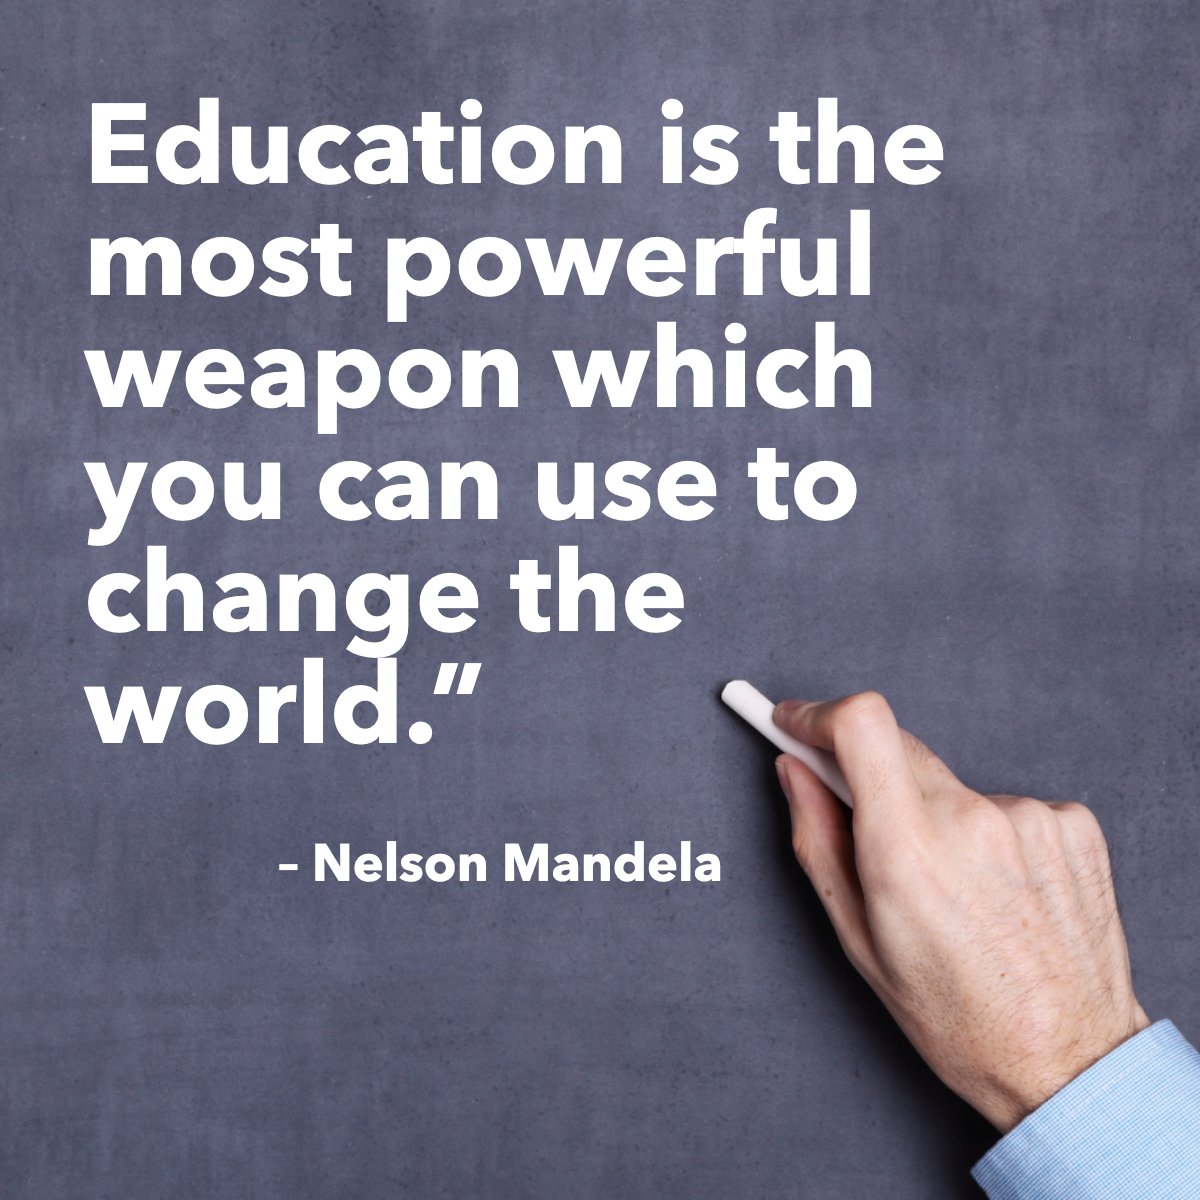 'Education is the most powerful weapon which you can use to change the world' 
— Nelson Mandela  📖

#educationquotes    #wisdomquote    #wisdomoftheday    #quotegram    #quoteoftheday    #nelsonmandela    #educationispower
#vanessapruetturierealtor